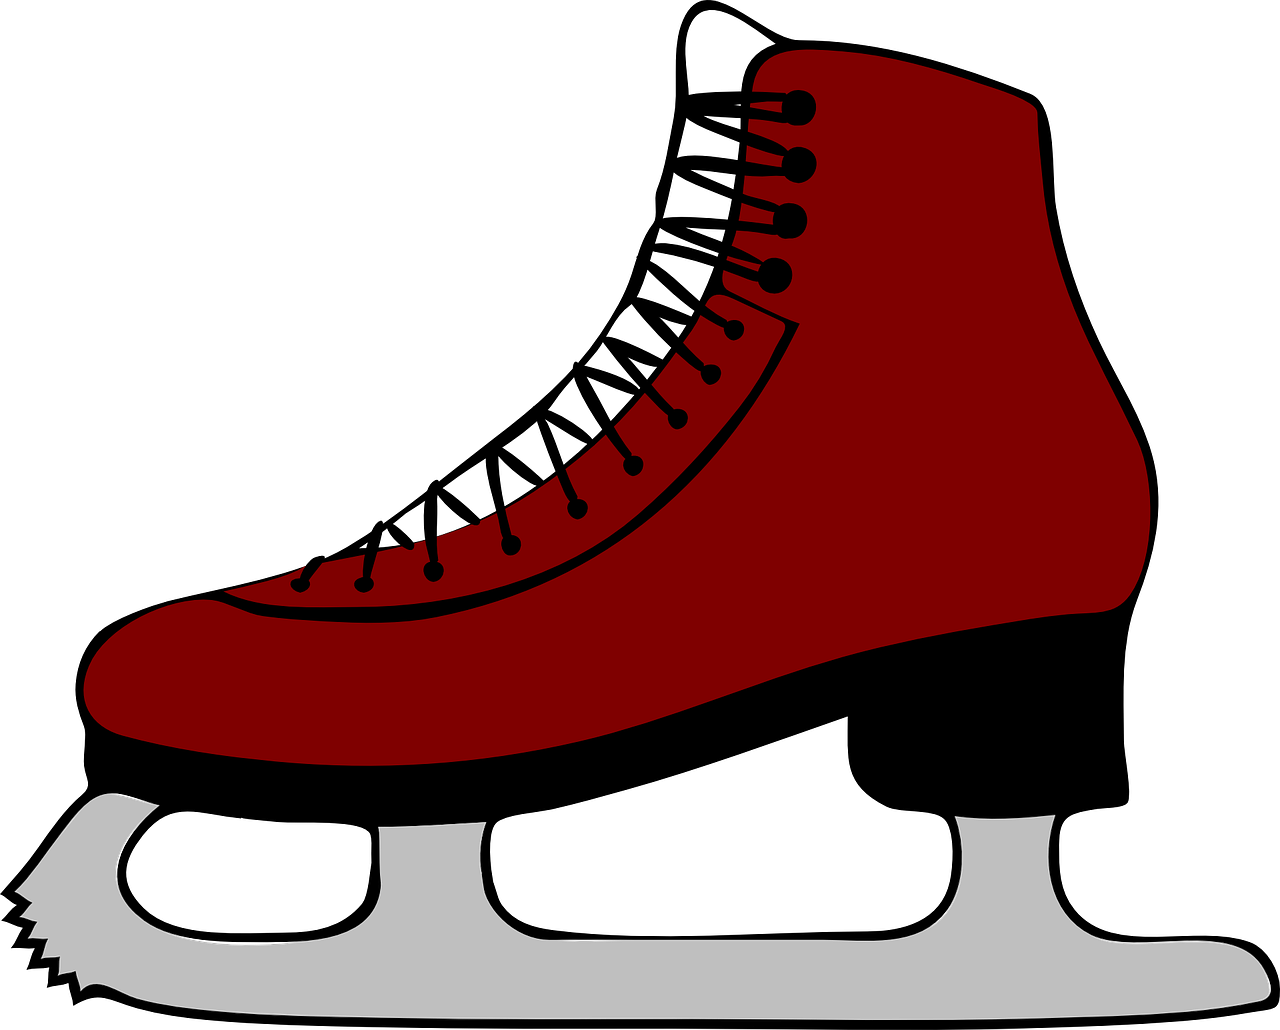 A Red Ice Skate With Black Background